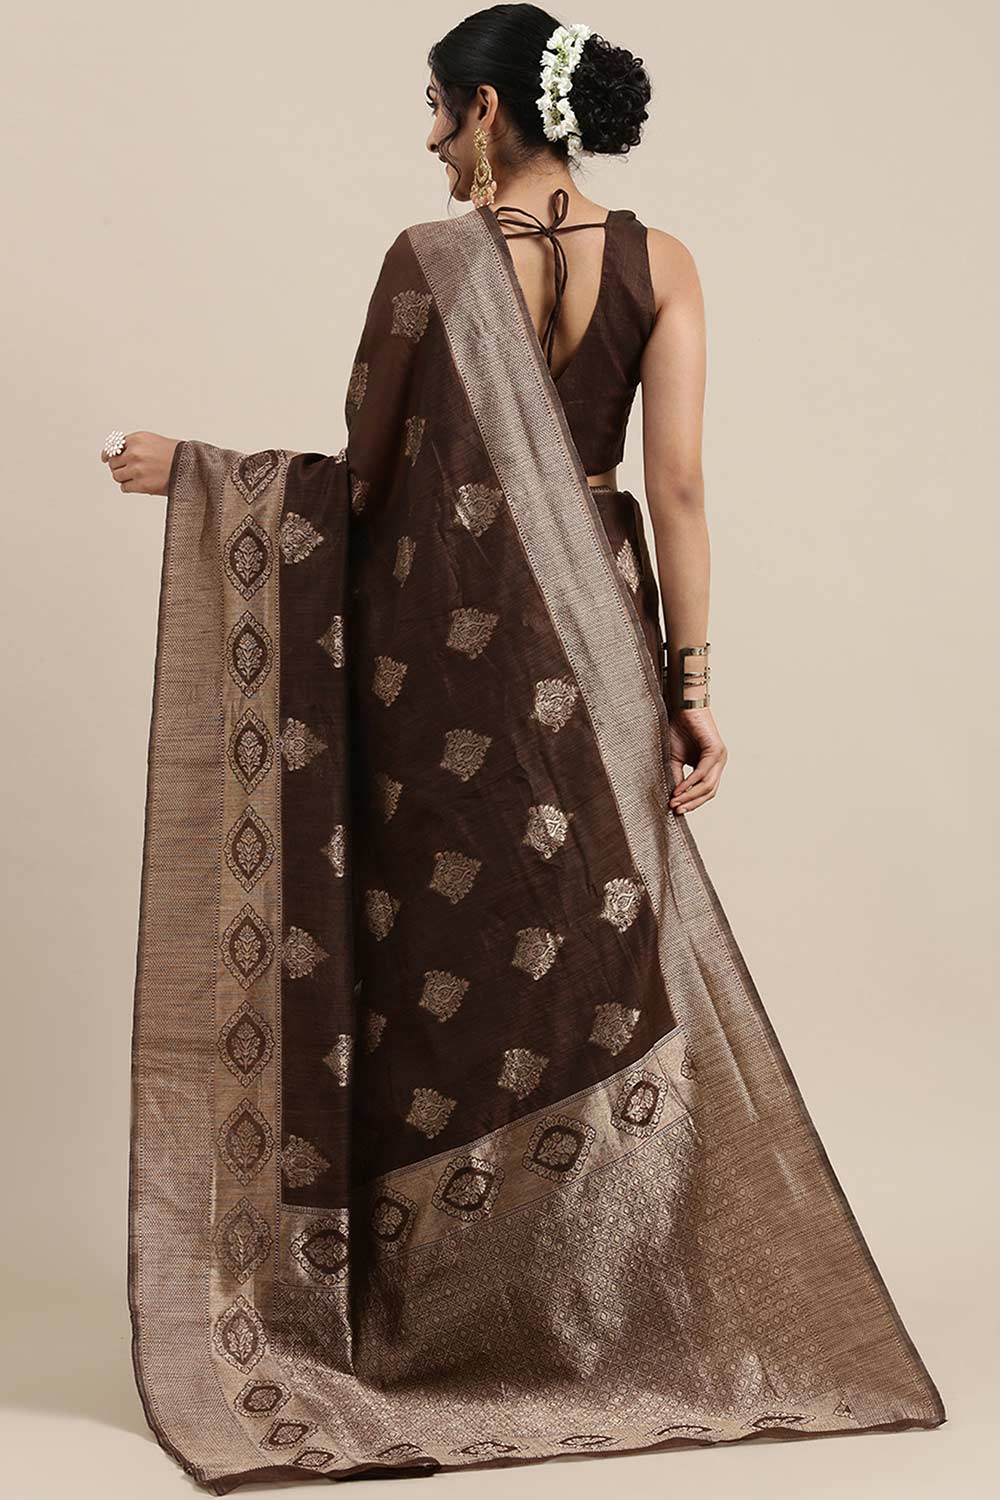 Shop Emara Brown Linen Floral Woven Design Banarasi One Minute Saree at best offer at our  Store - One Minute Saree